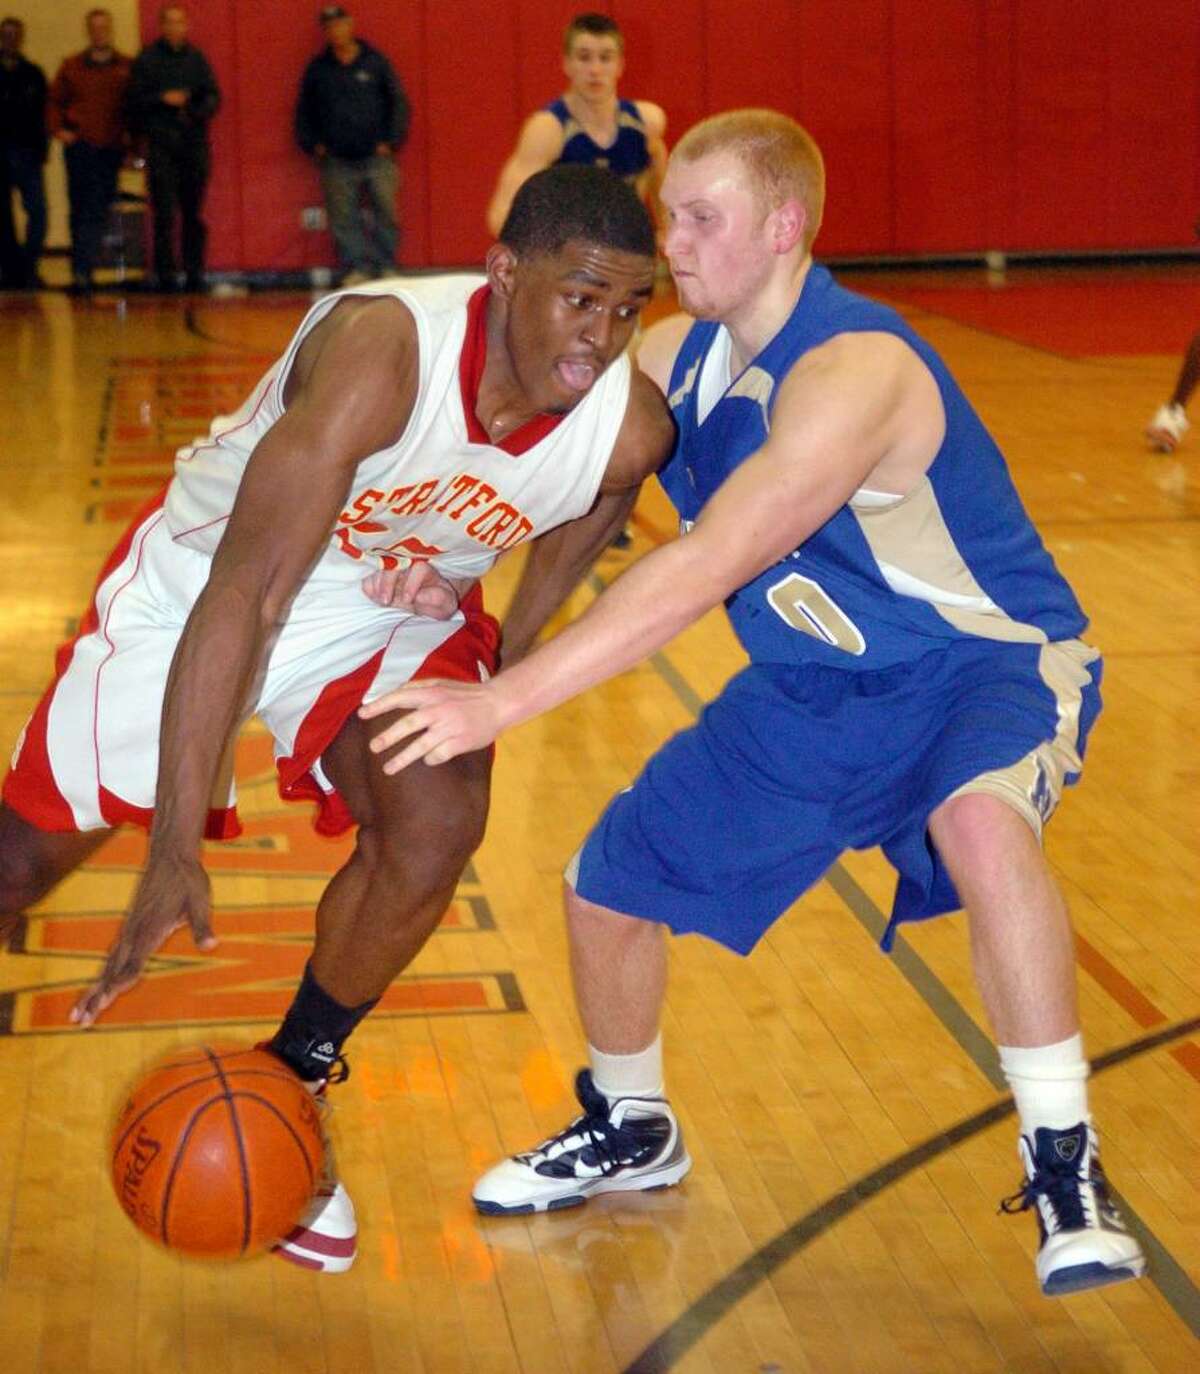 Stratford's #35 Brandon Sherrod, left, takes the ball around Newtown's #50 George Zaruba, during SWC Championship action in Monroe on Thursday March 04, 2010. Stratford went on to win 53-41.